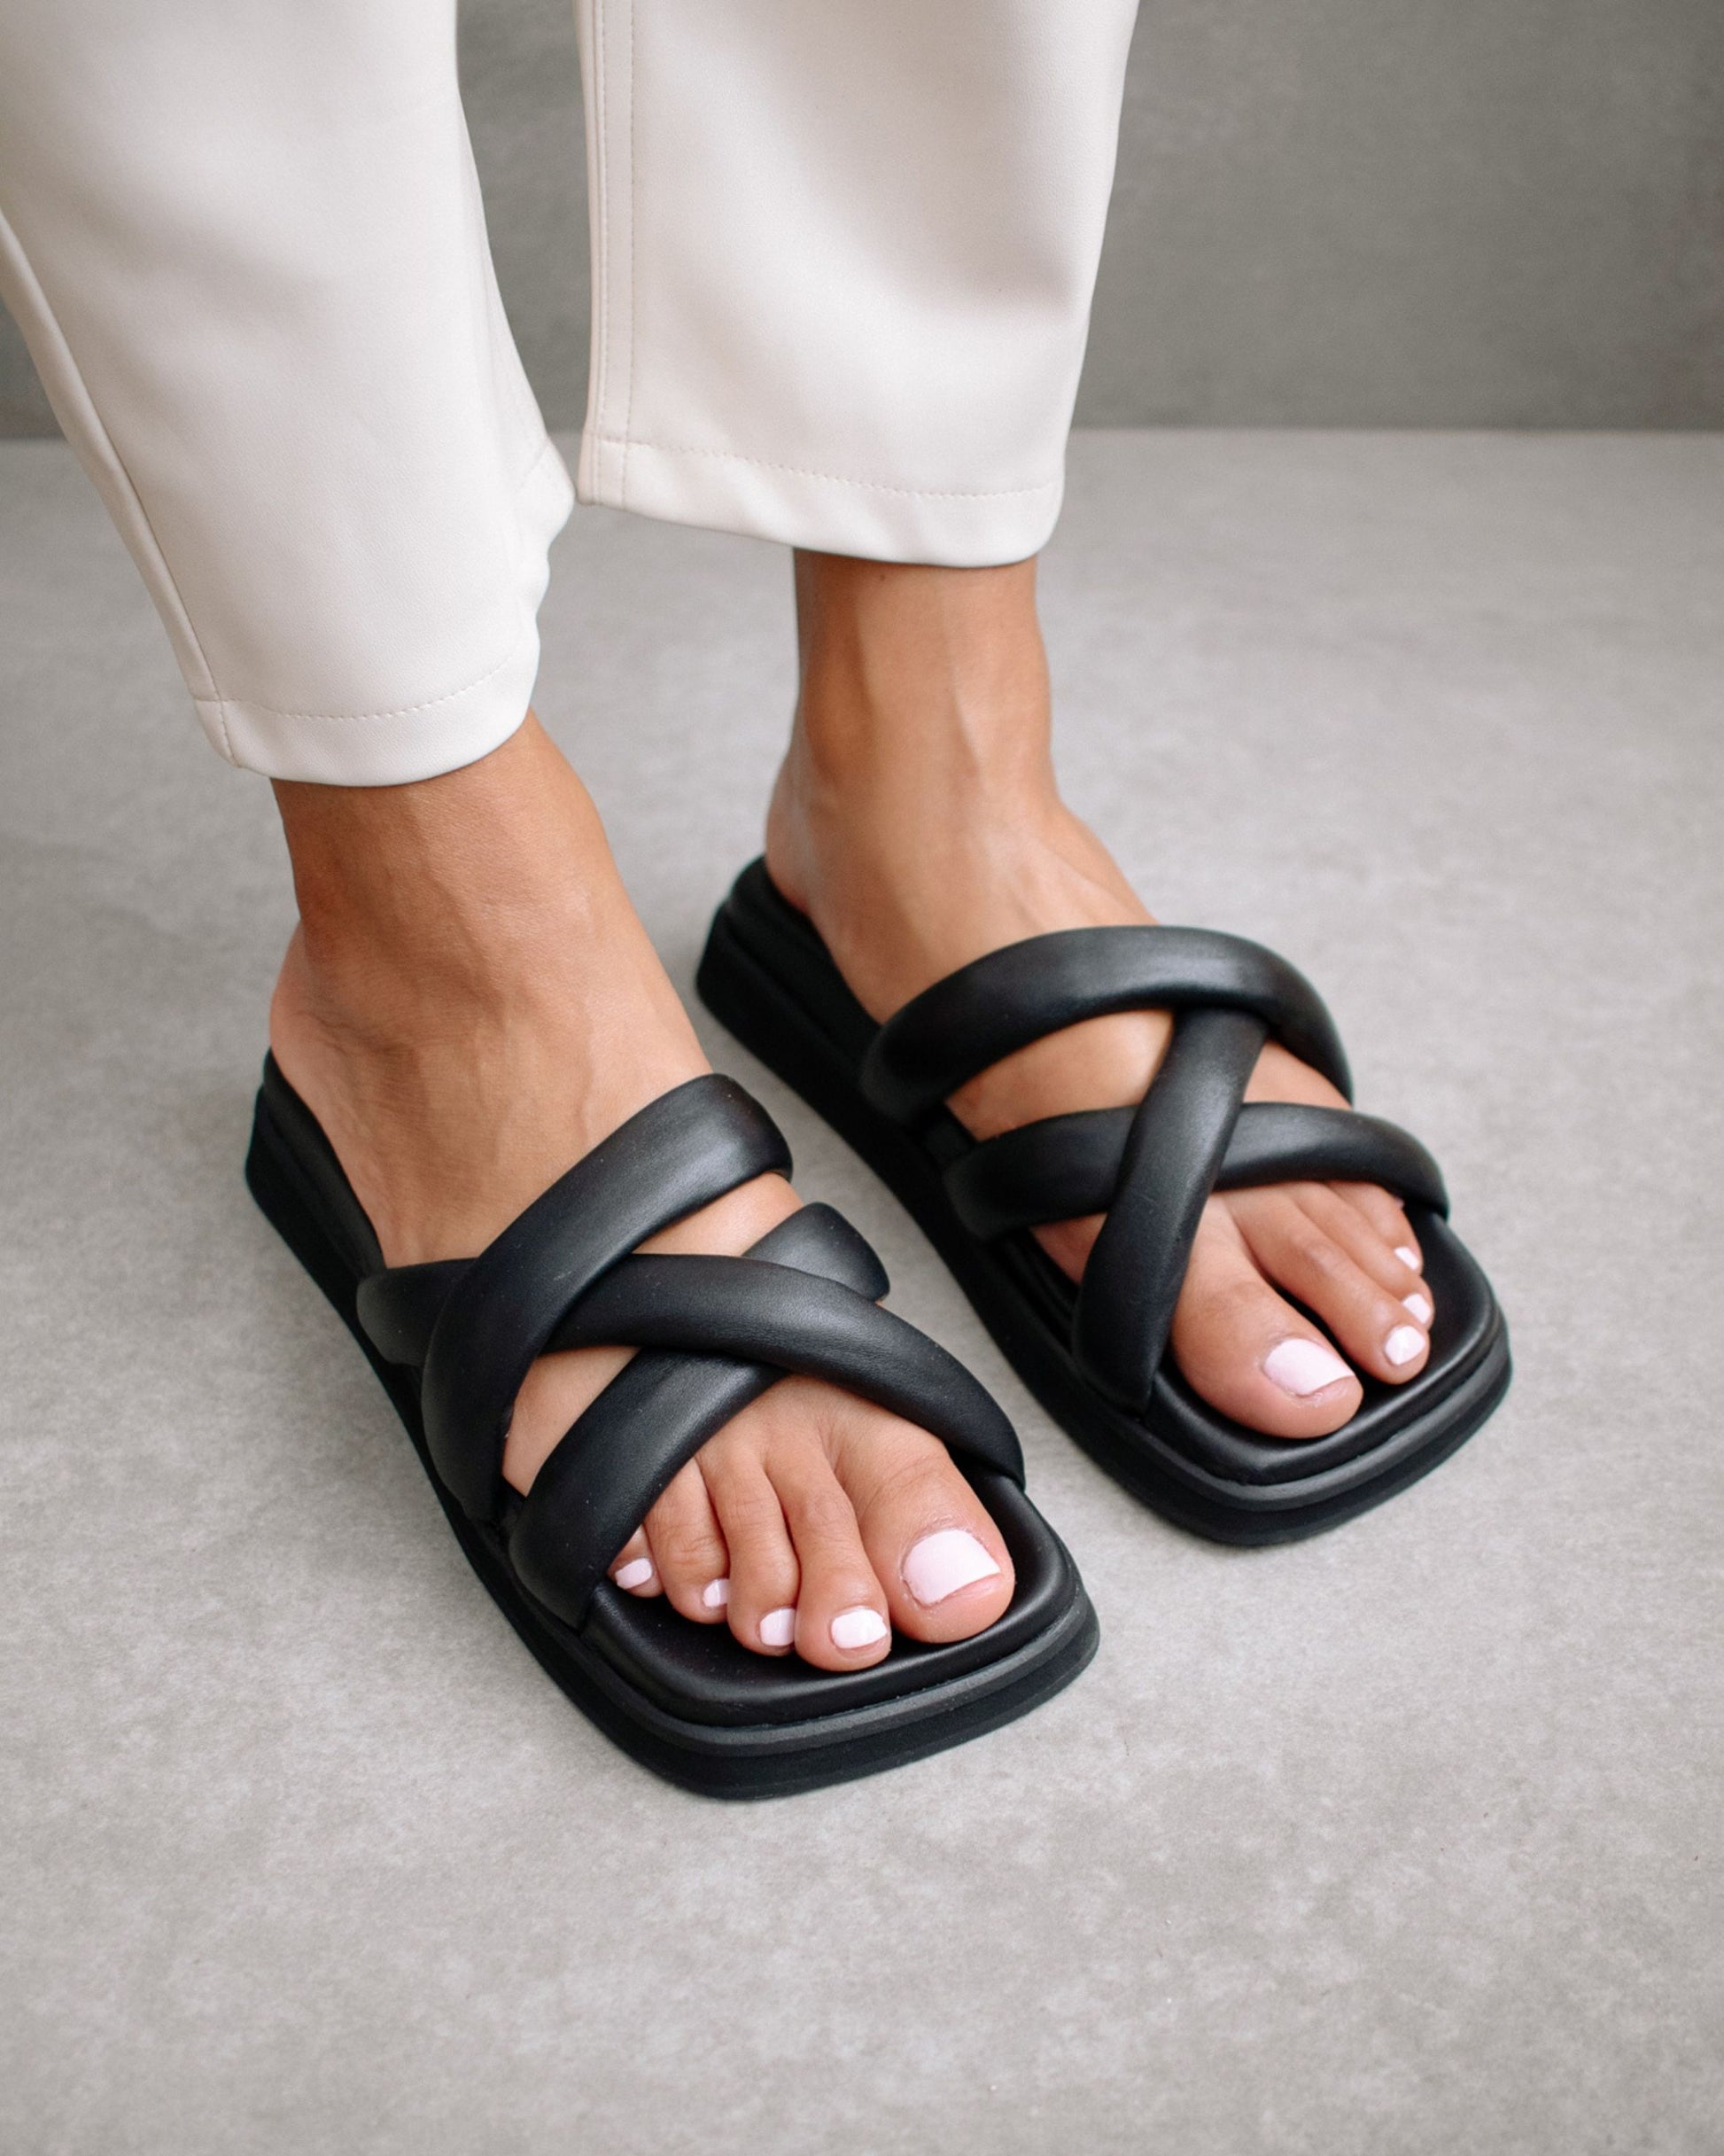 A polished, minimal design that stands the test of time. Made from supple black leather, featuring tubular criss-cross straps and cushioned stacked soles which make slipping into them a real treat for your feet. Sustainably made in Spain.